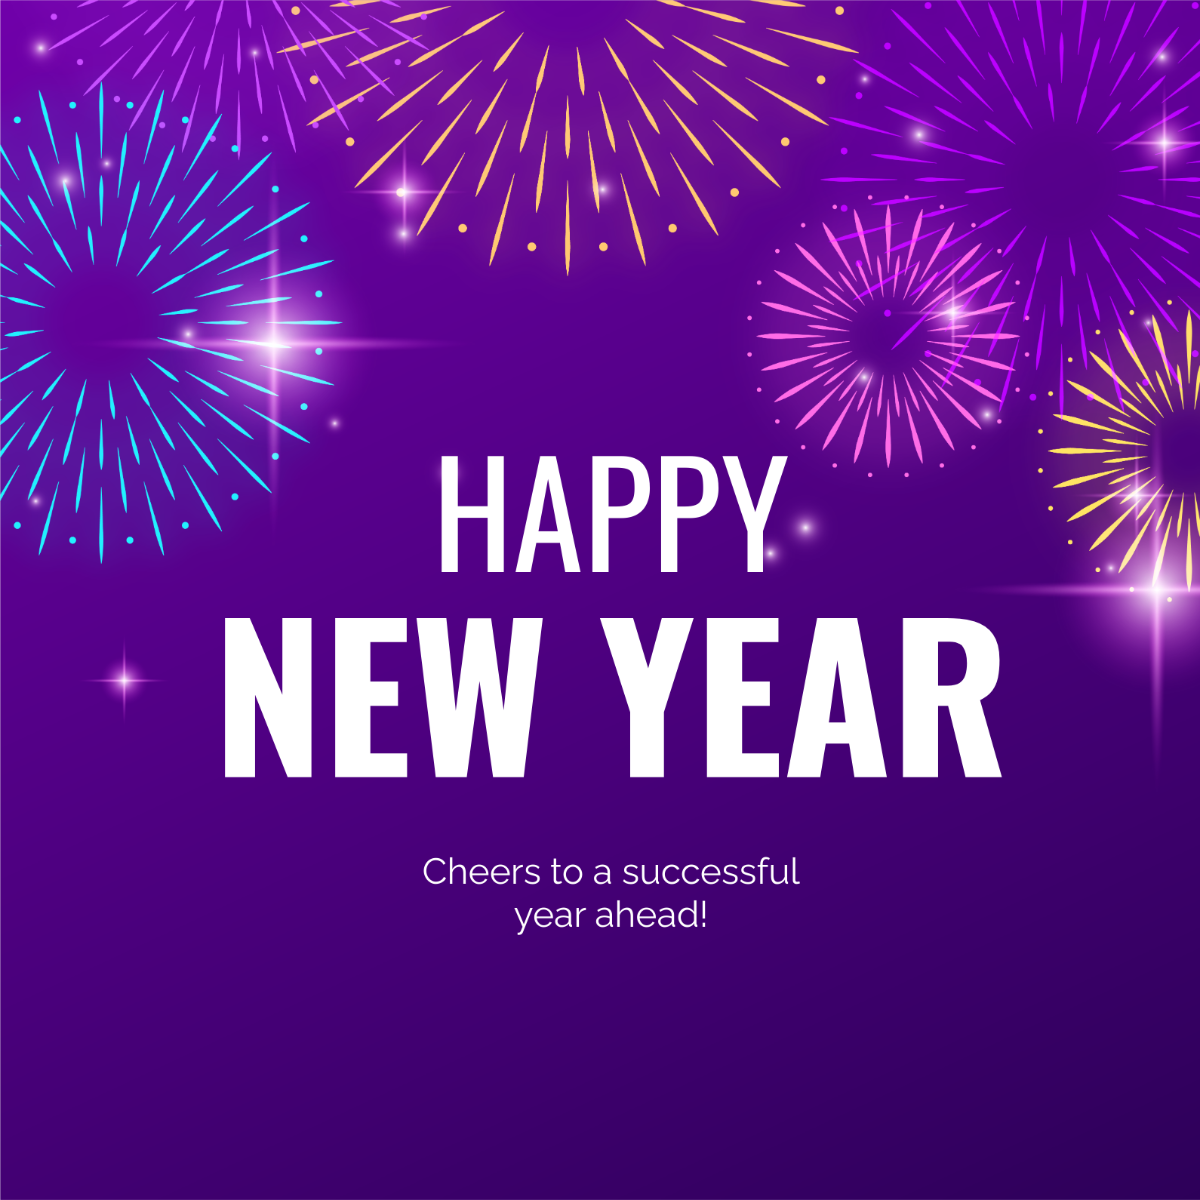 Free New Year Social Media Post for Business Template